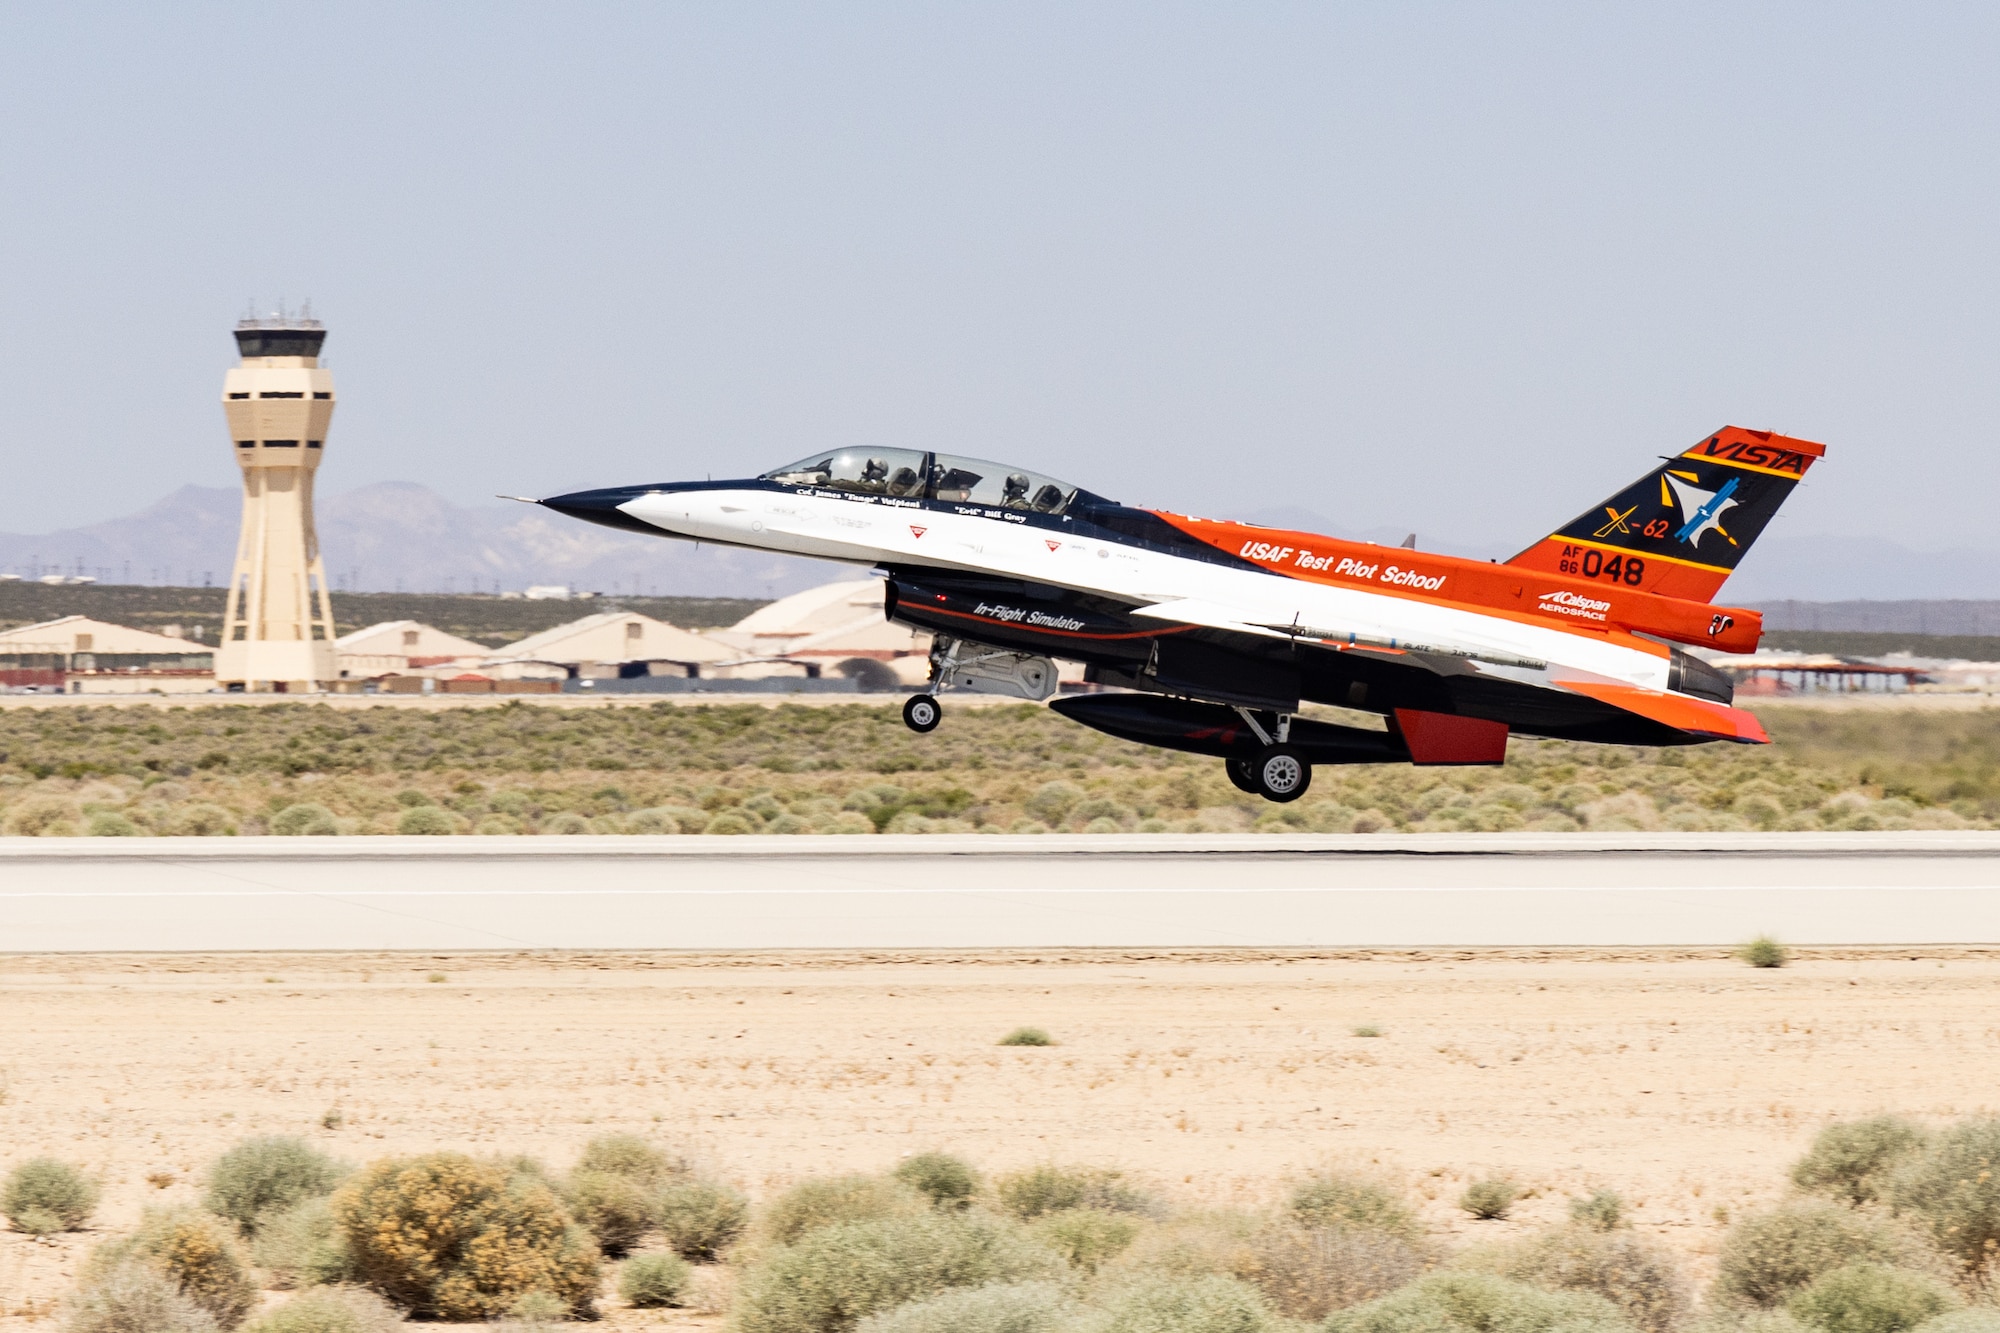 Secretary of the Air Force Frank Kendall, onboard the X-62 VISTA, takes off from Edwards Air Force Base, California, May 2. (Air Force photo by Madeline Guadarrama)